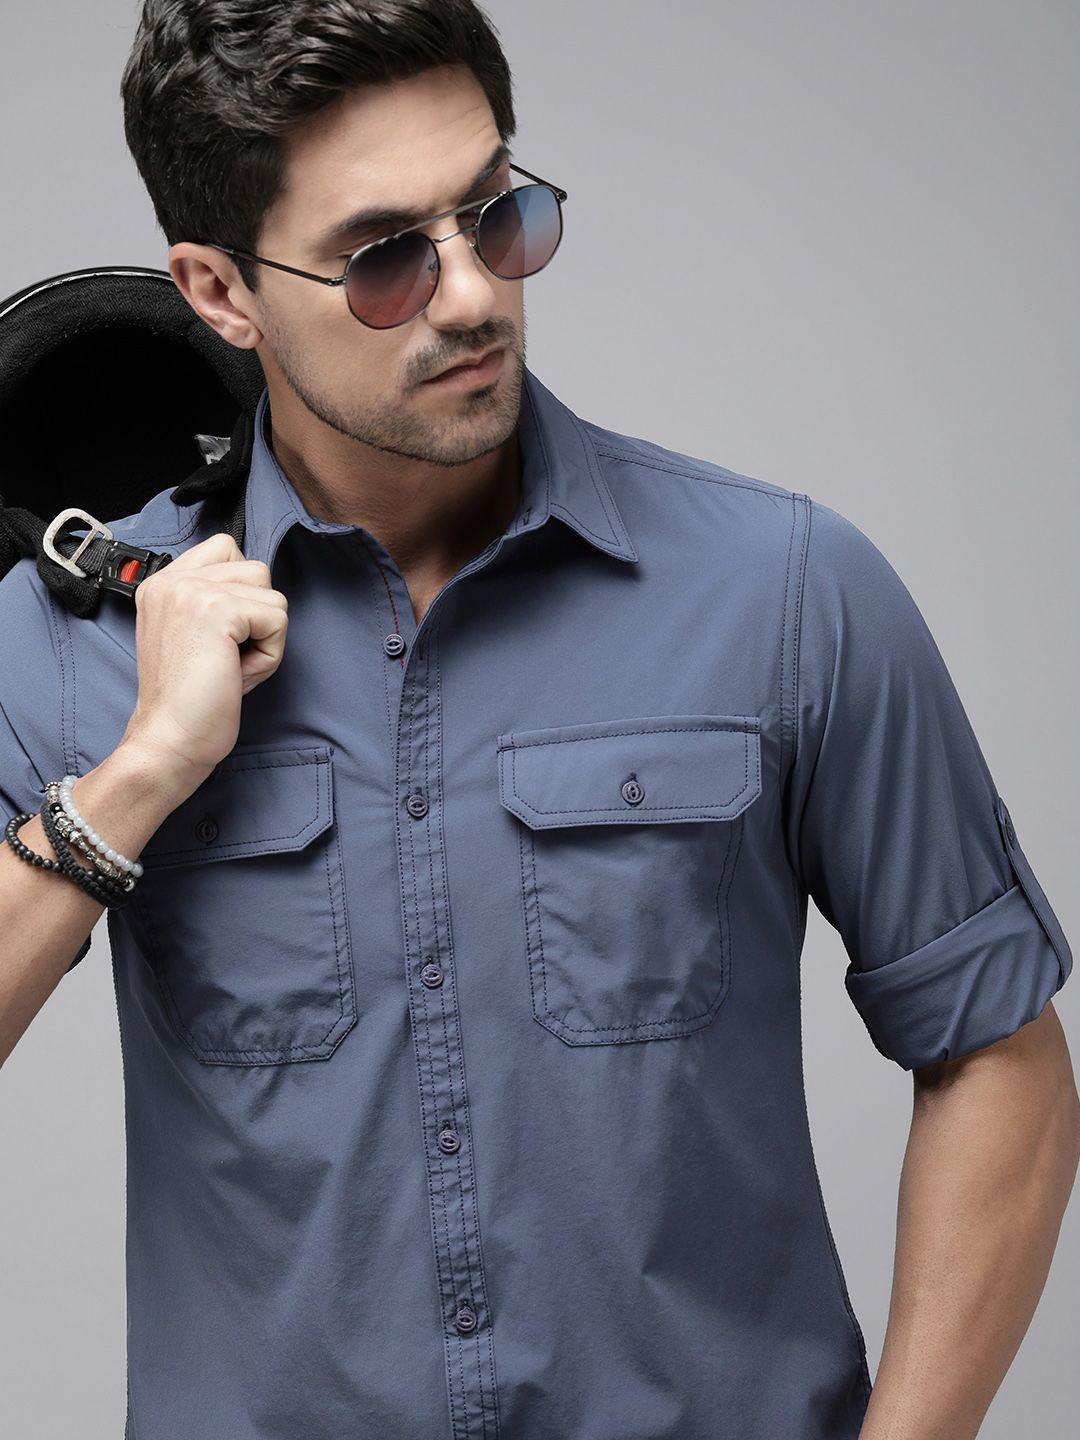 the roadster lifestyle co. men solid roll up sleeves casual shirt with pocket detailing